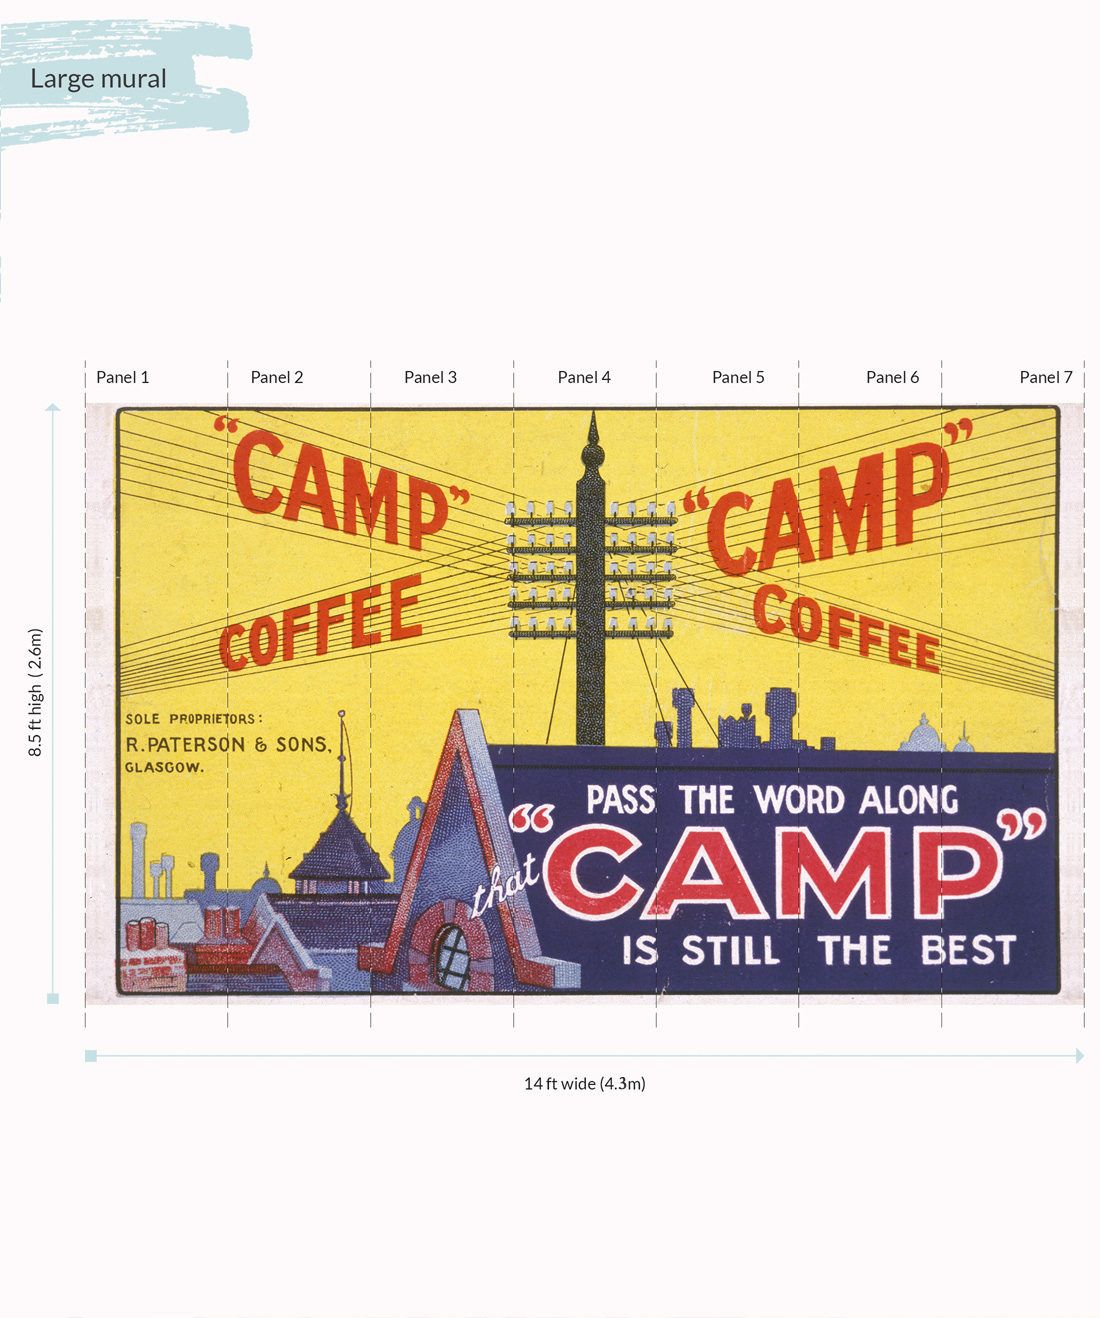 Camp Coffee Wall Mural - Large